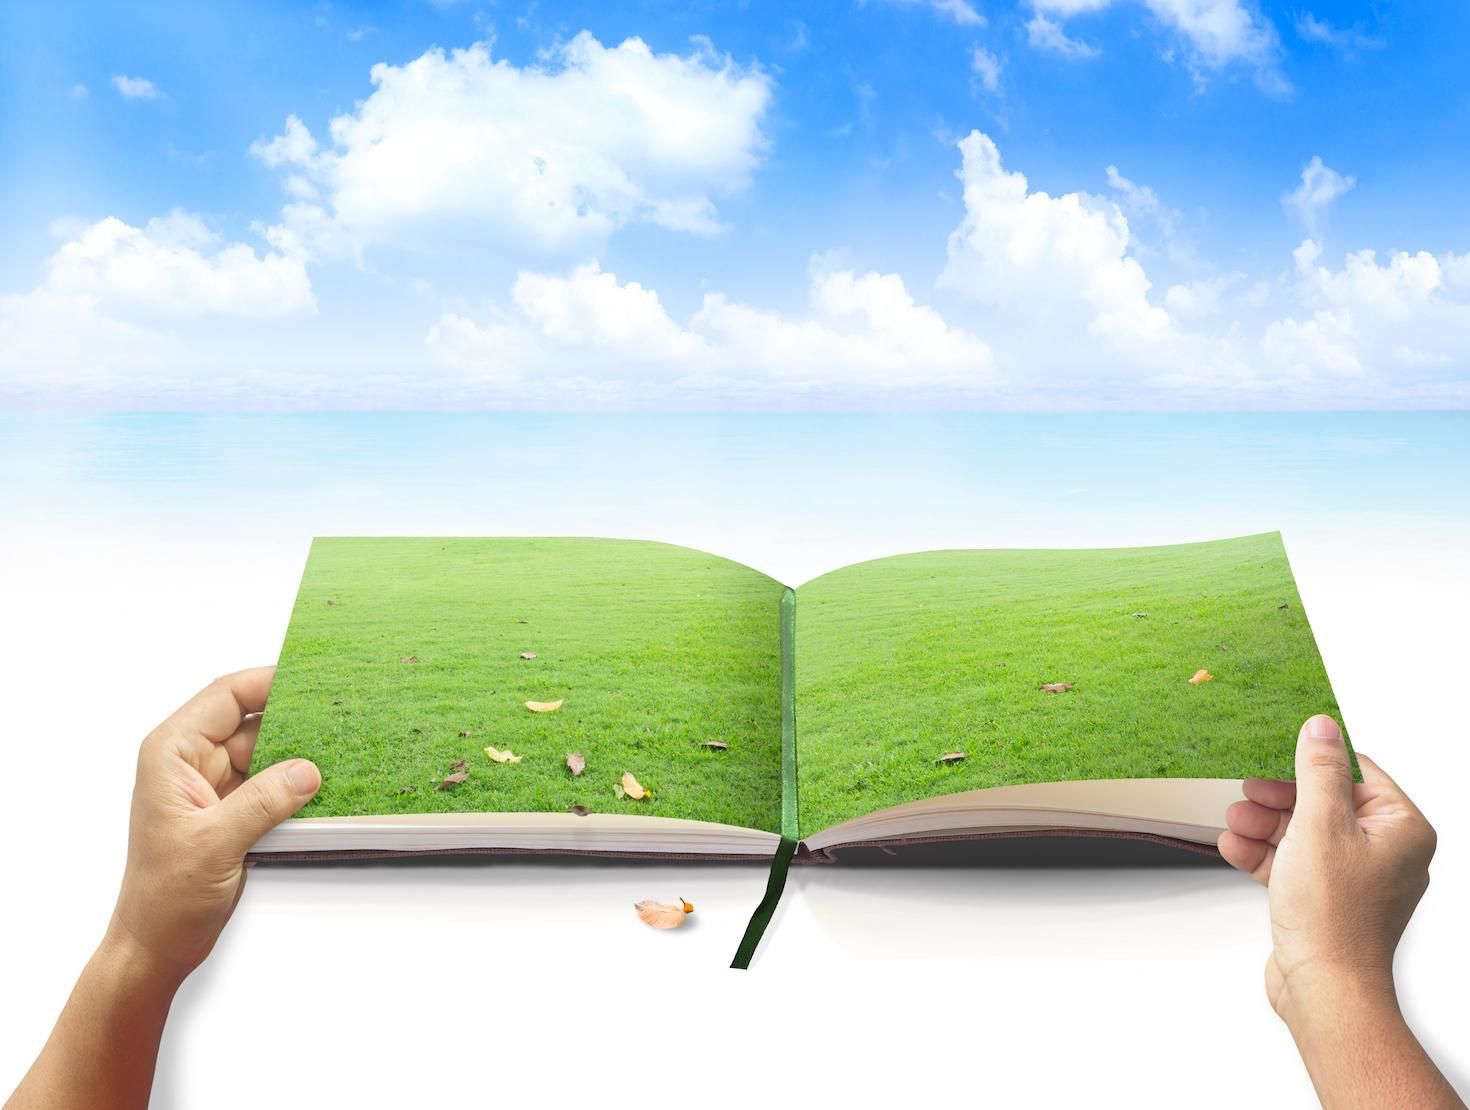 Illustration of a book showing the page opened to a green field.